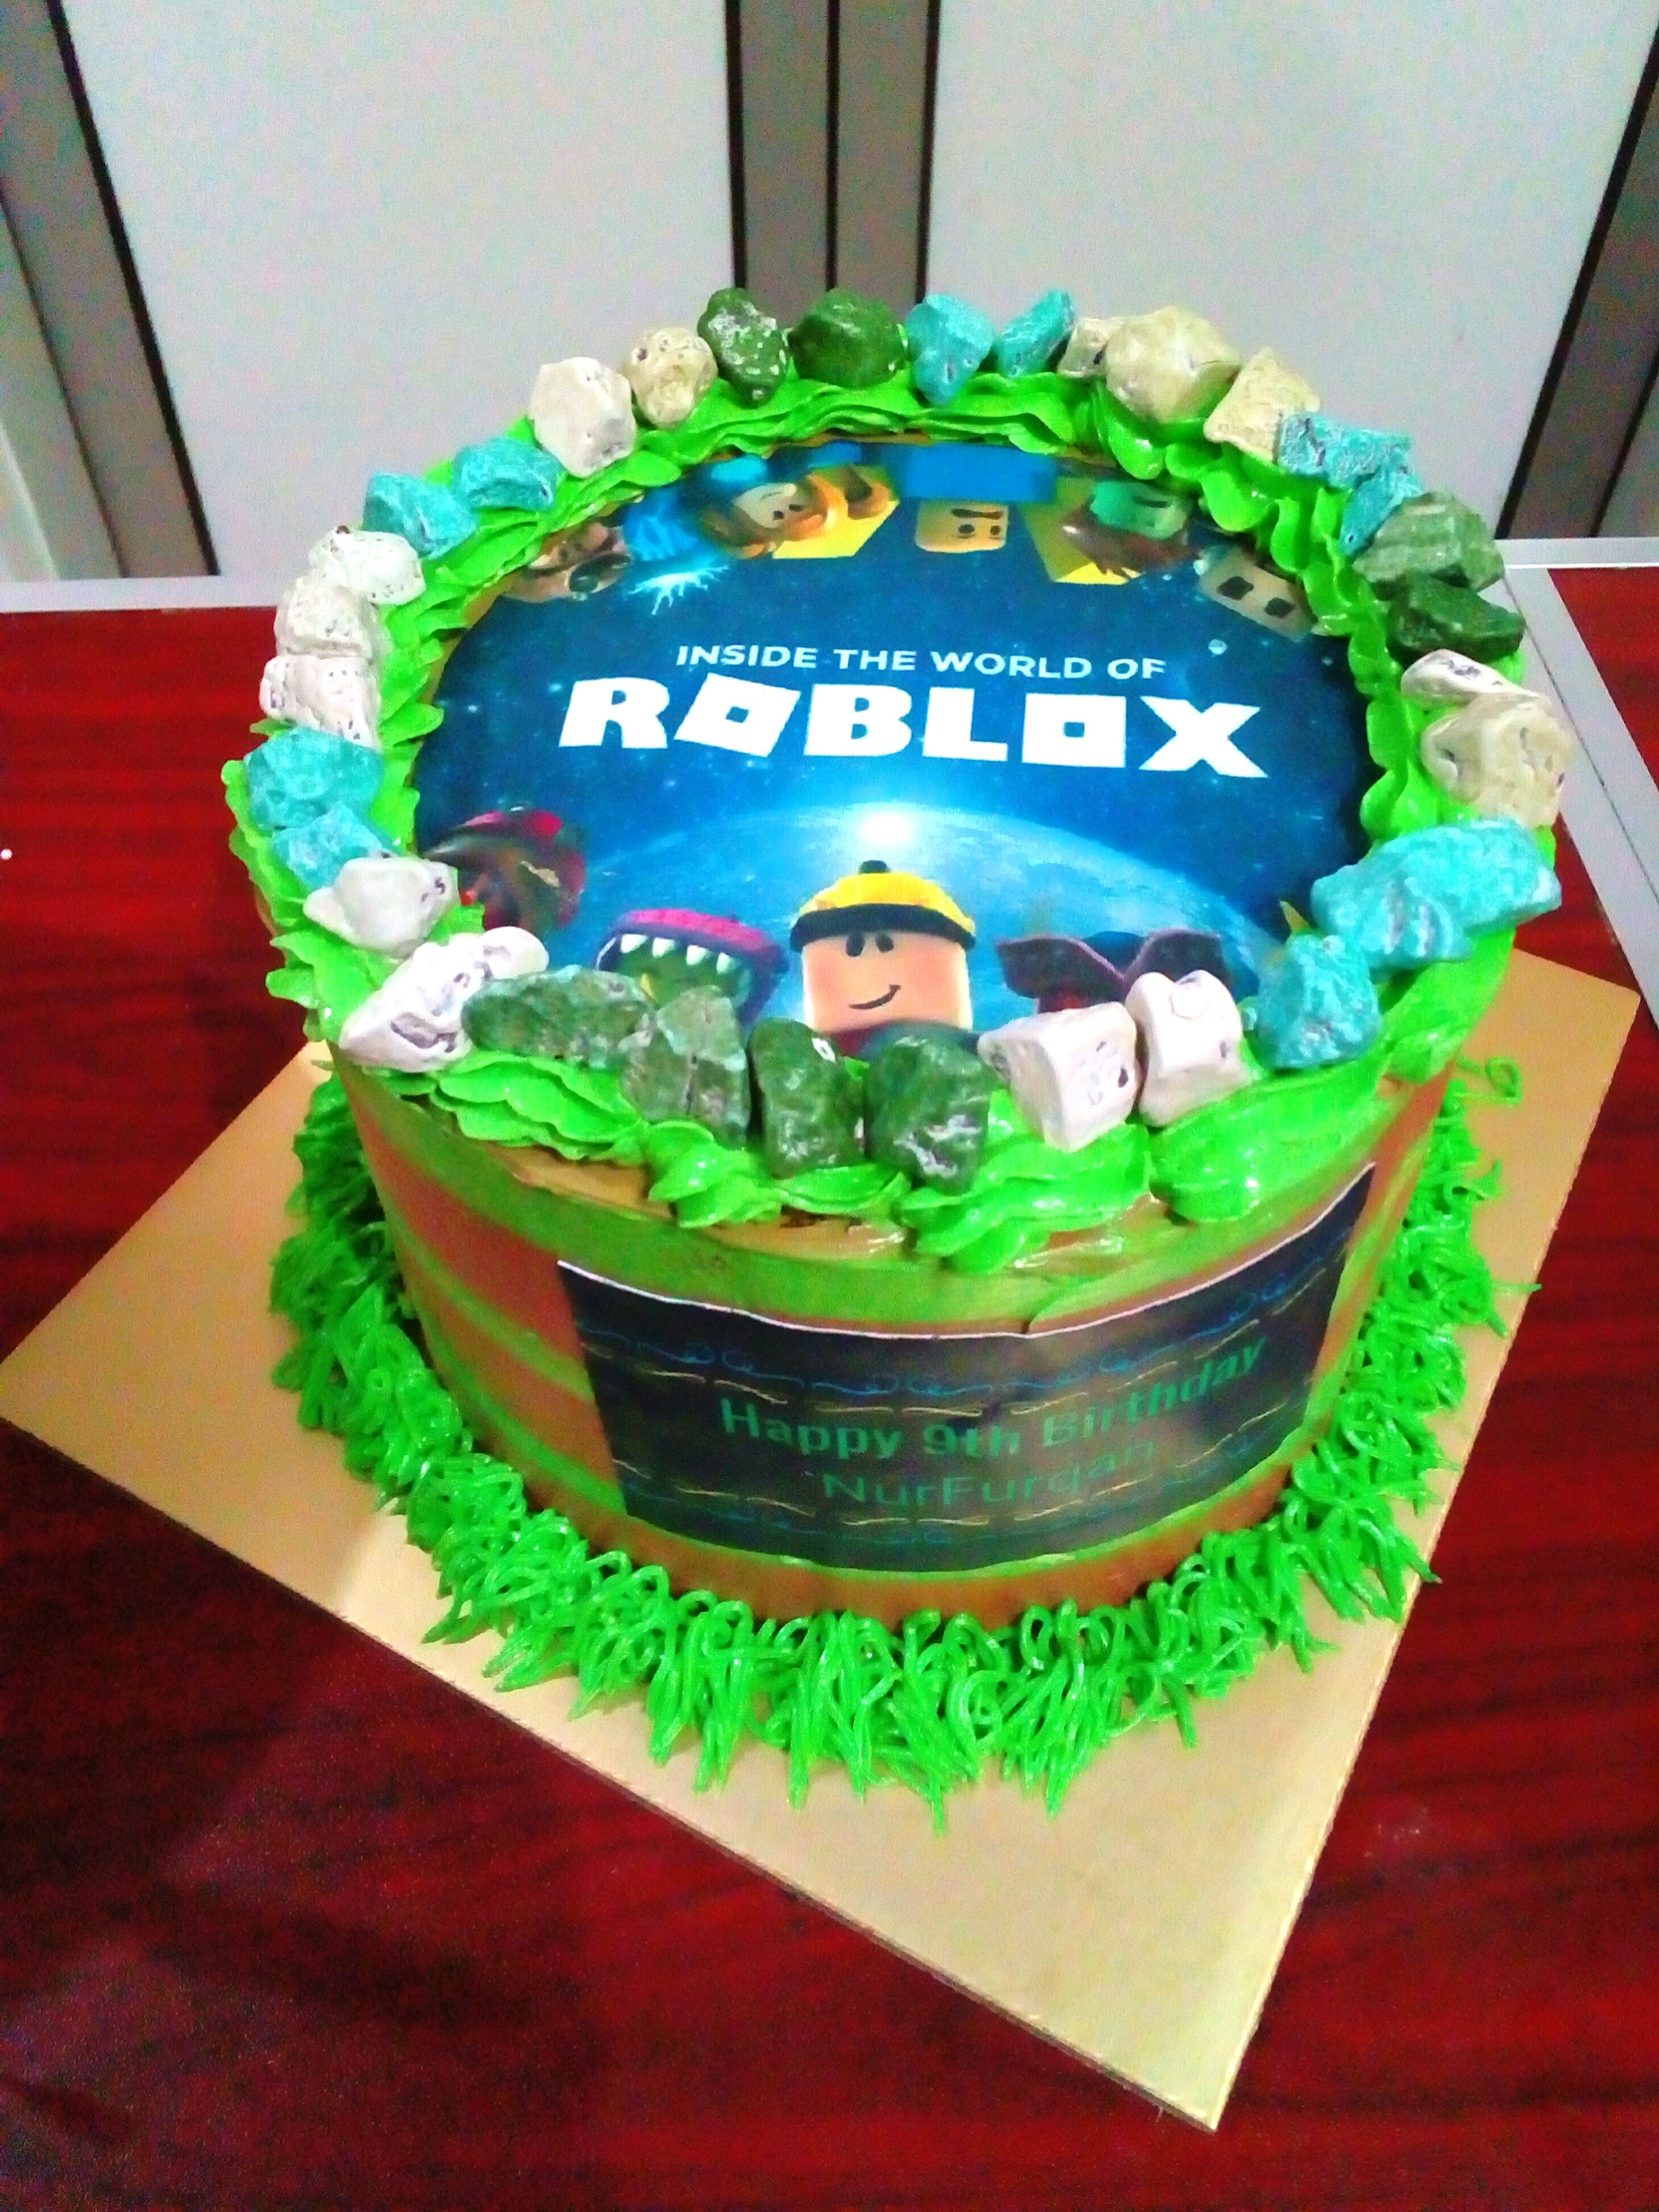 Roblox Pictures For Cakes Irobux Works - roblox cake design ideas